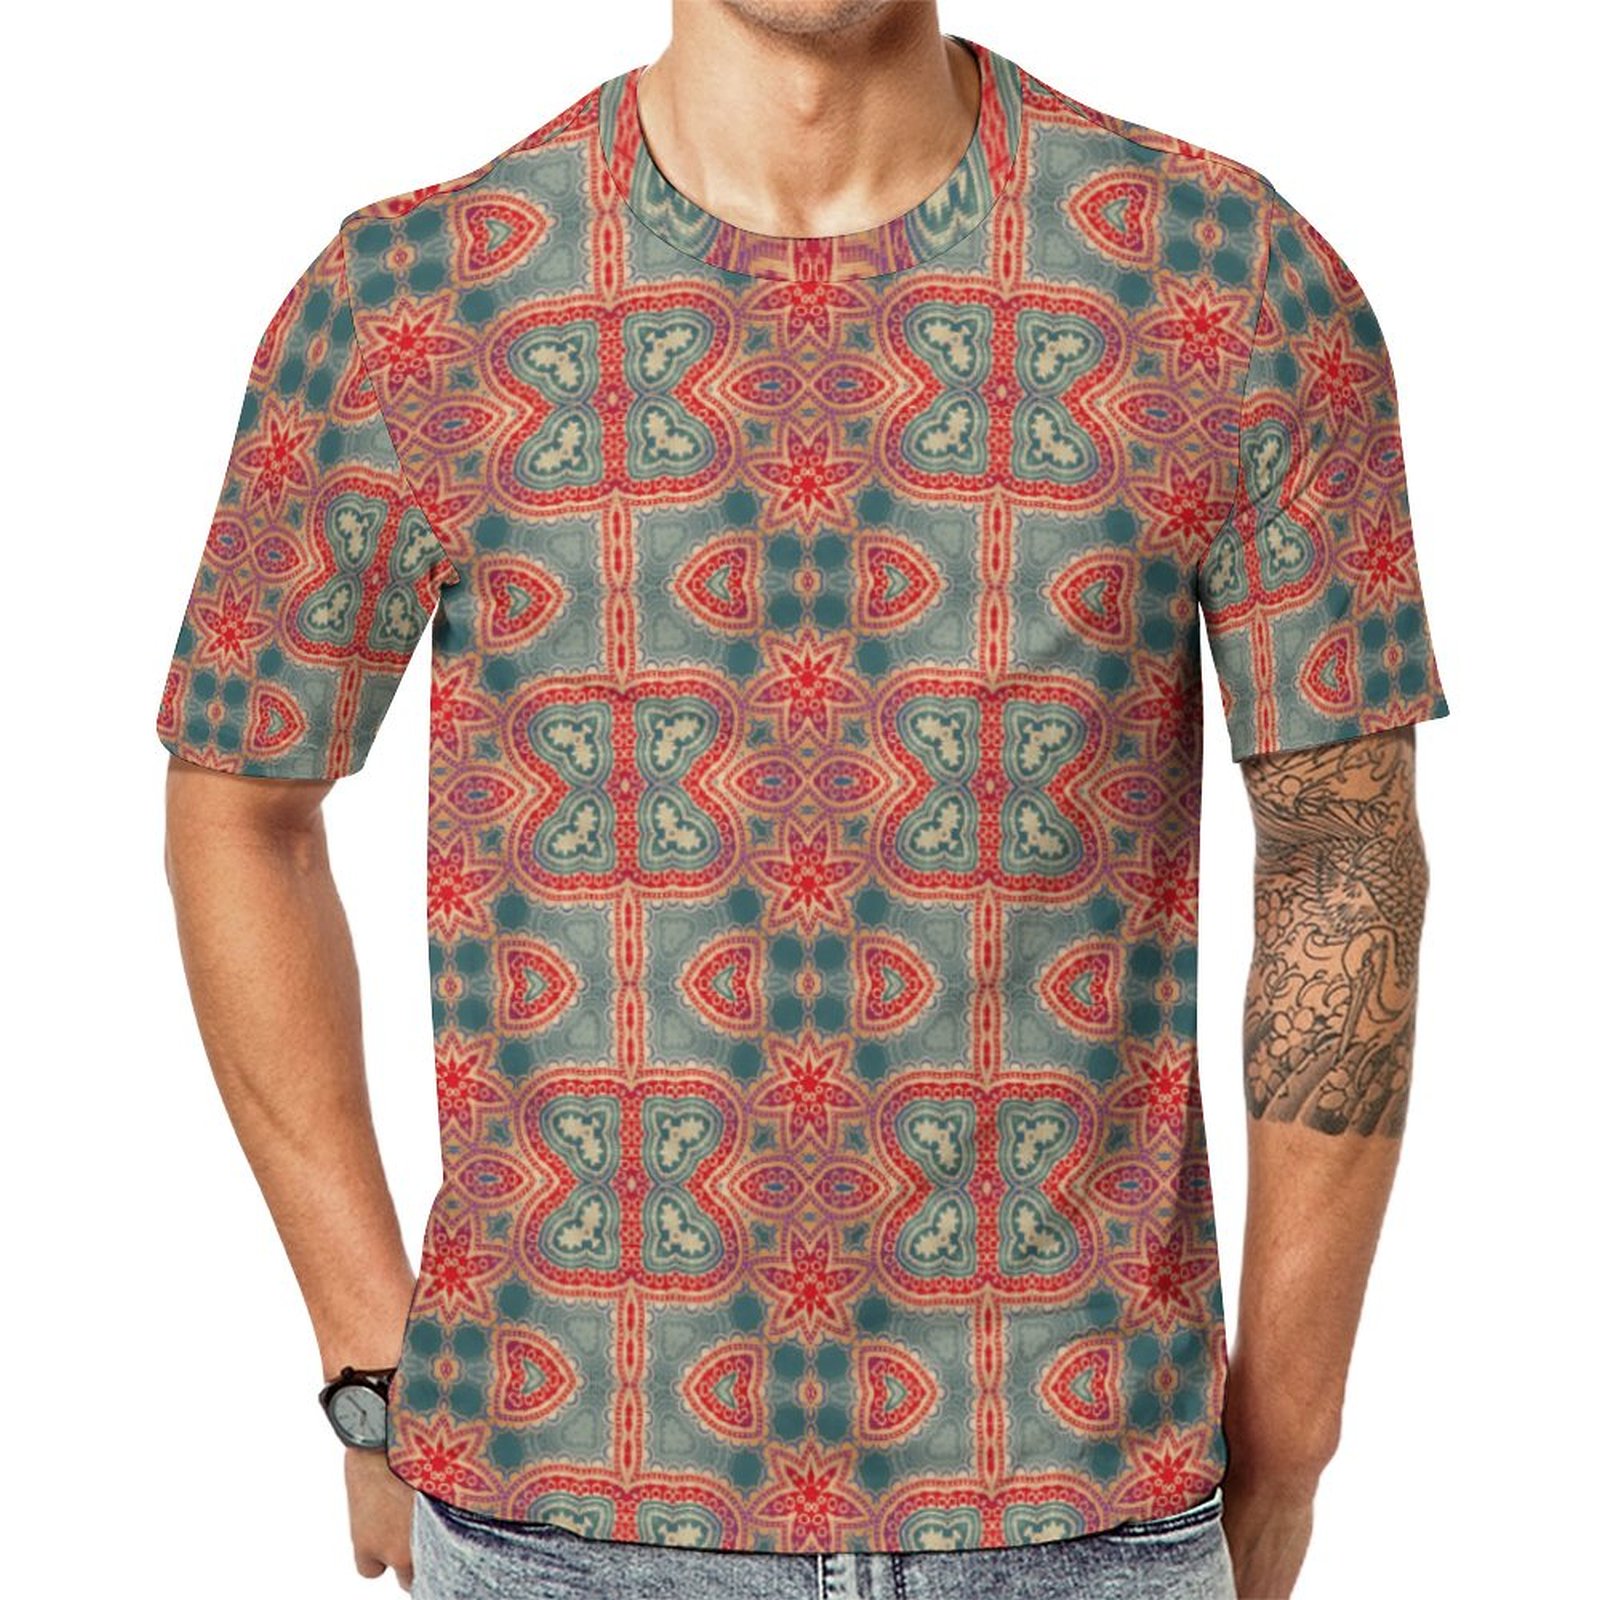 Ethnic Indian Ornate Boho Red And Teal Short Sleeve Print Unisex Tshirt Summer Casual Tees for Men and Women Coolcoshirts